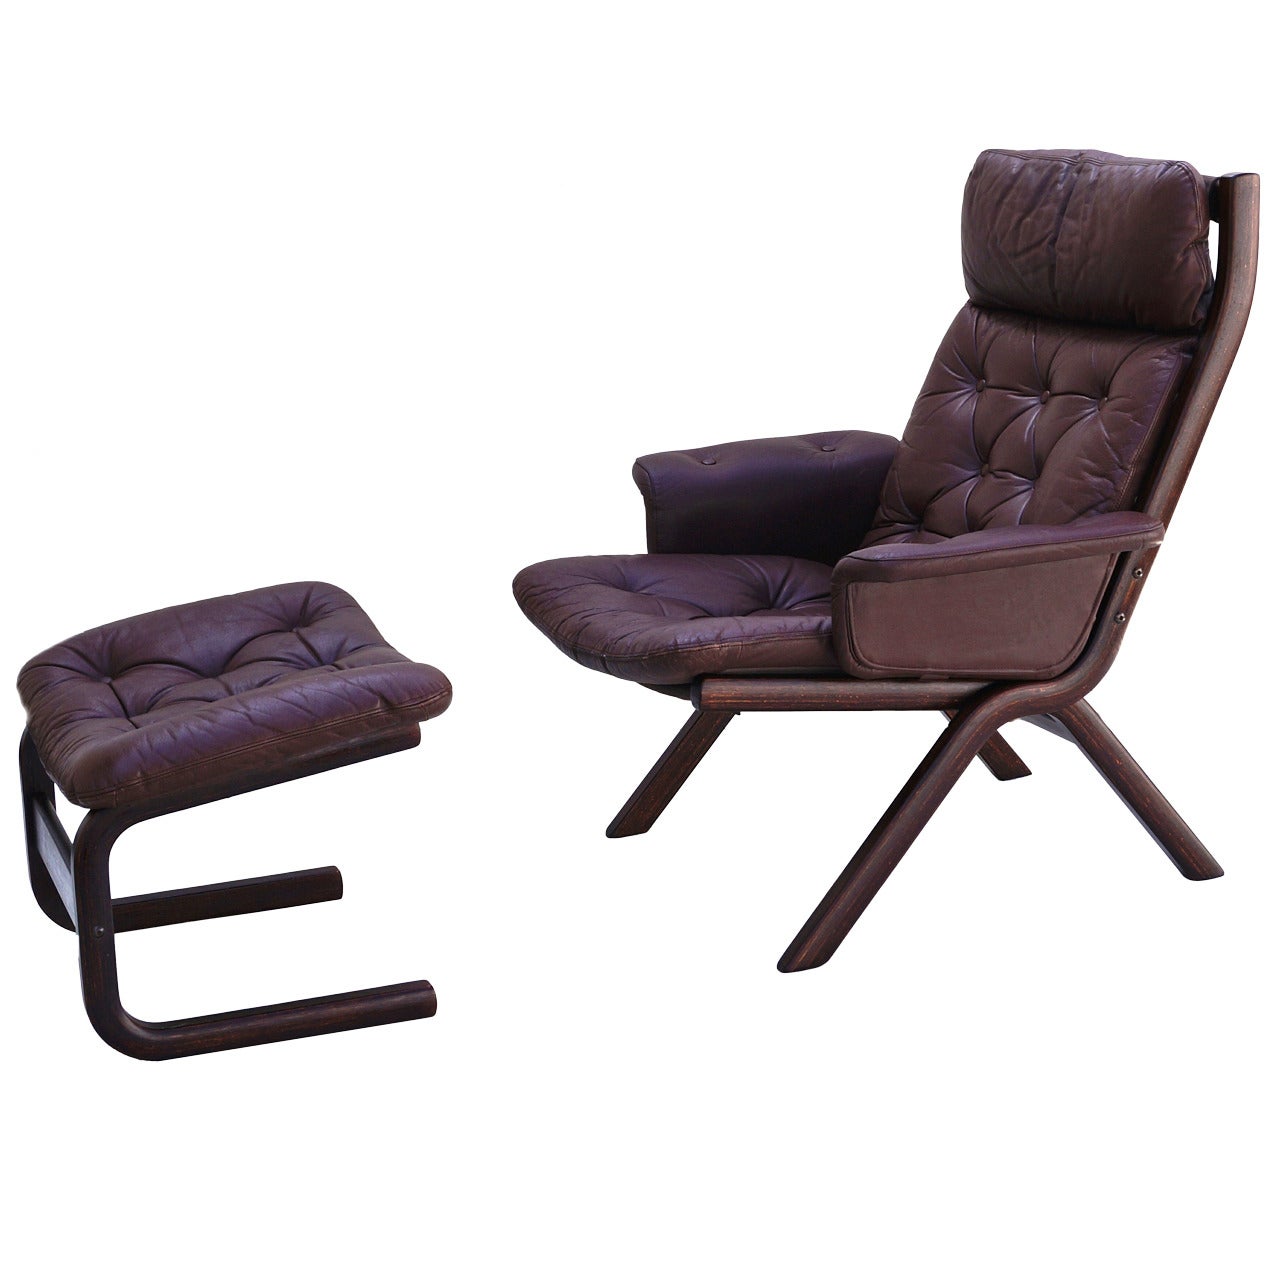 Danish Modern Leather Sculptural Sling Lounge Chair and Ottoman